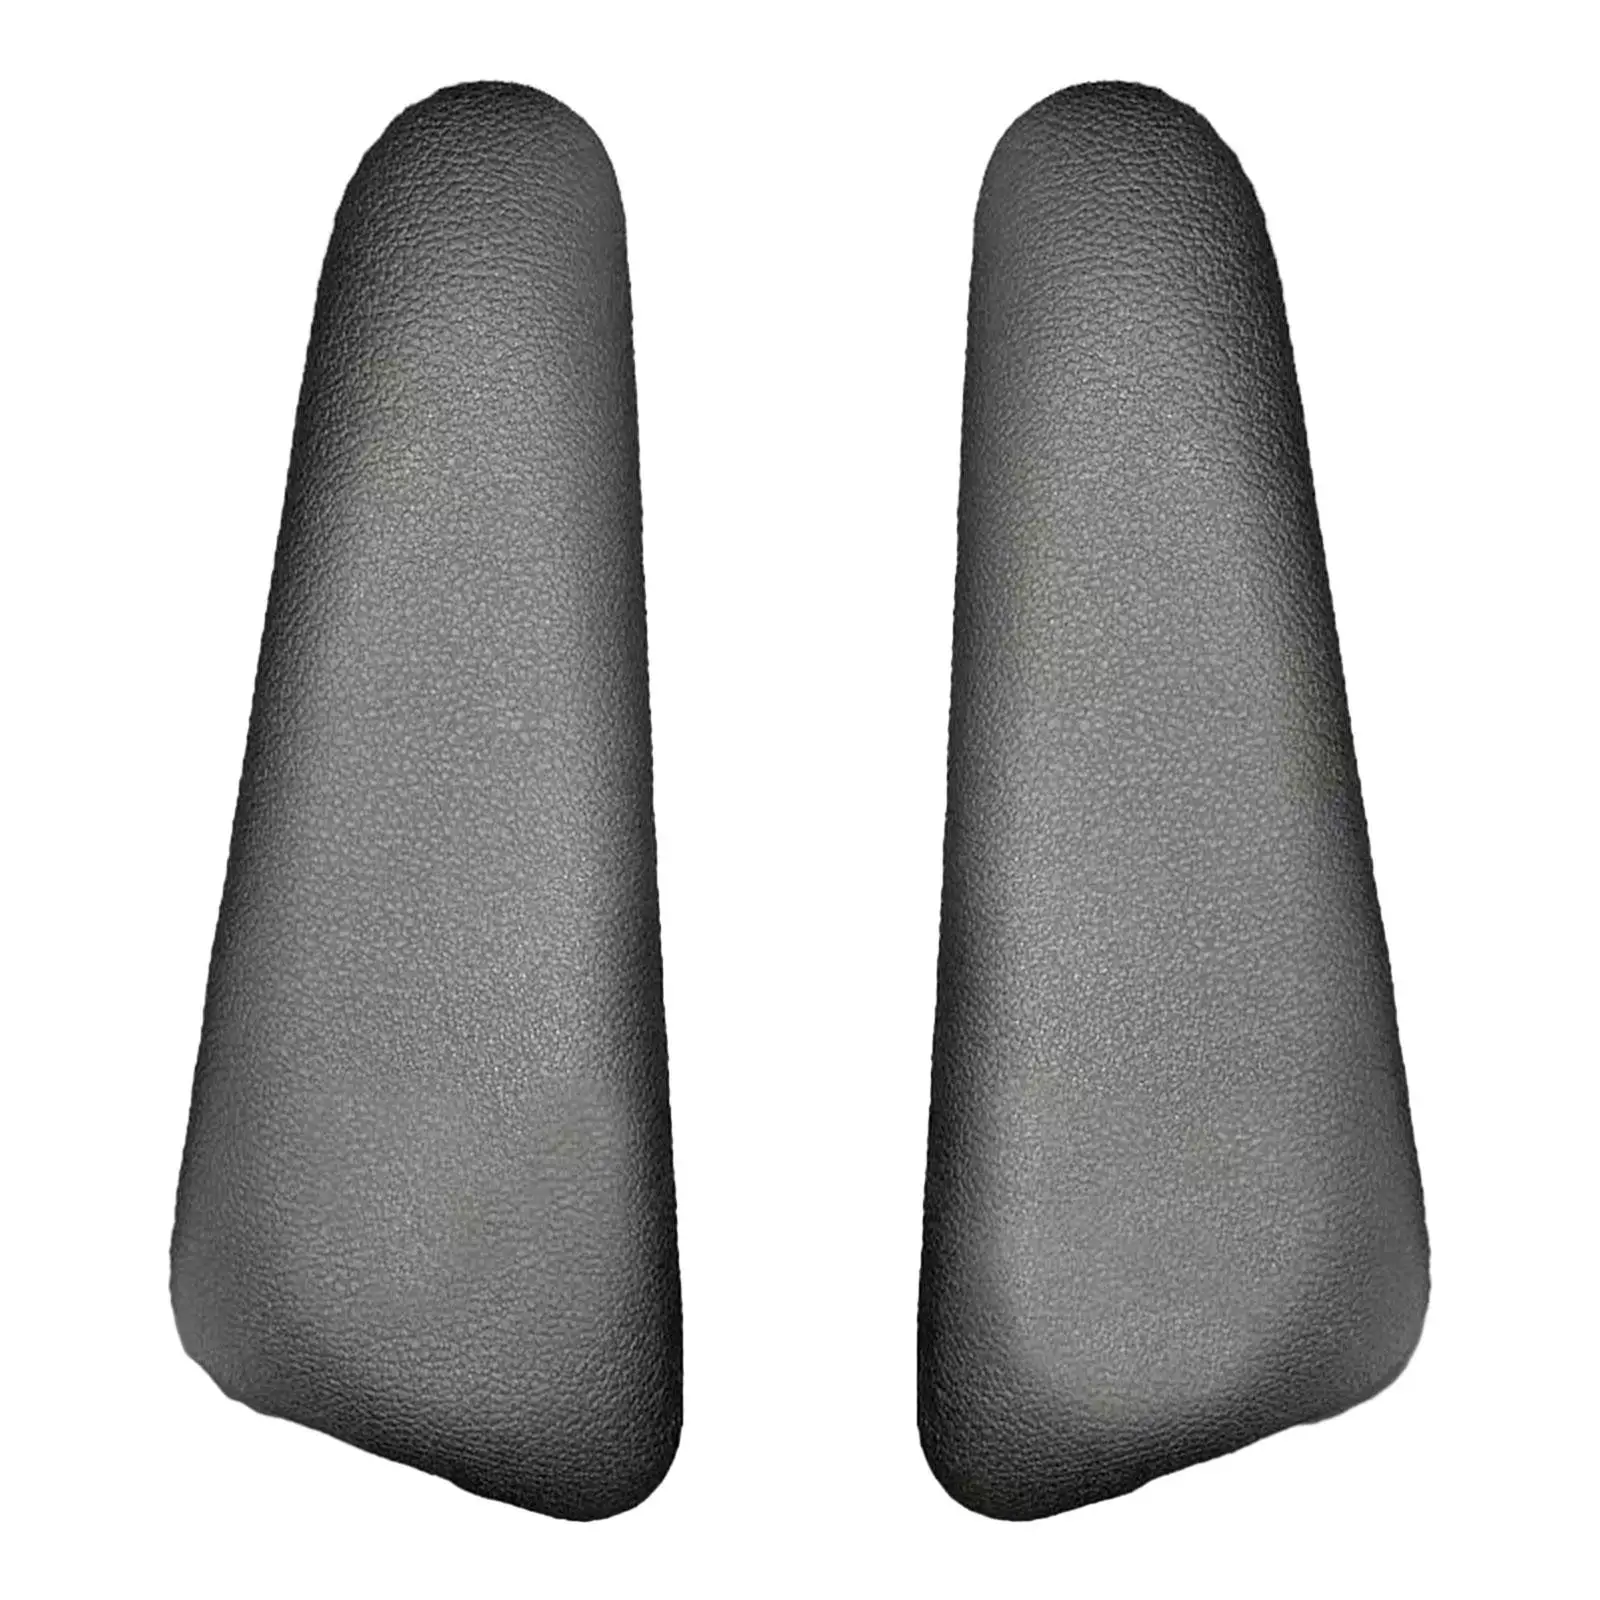 2x Car Knee Pad Cushions Accessories Protective Pad for Tesla Model 3 Y